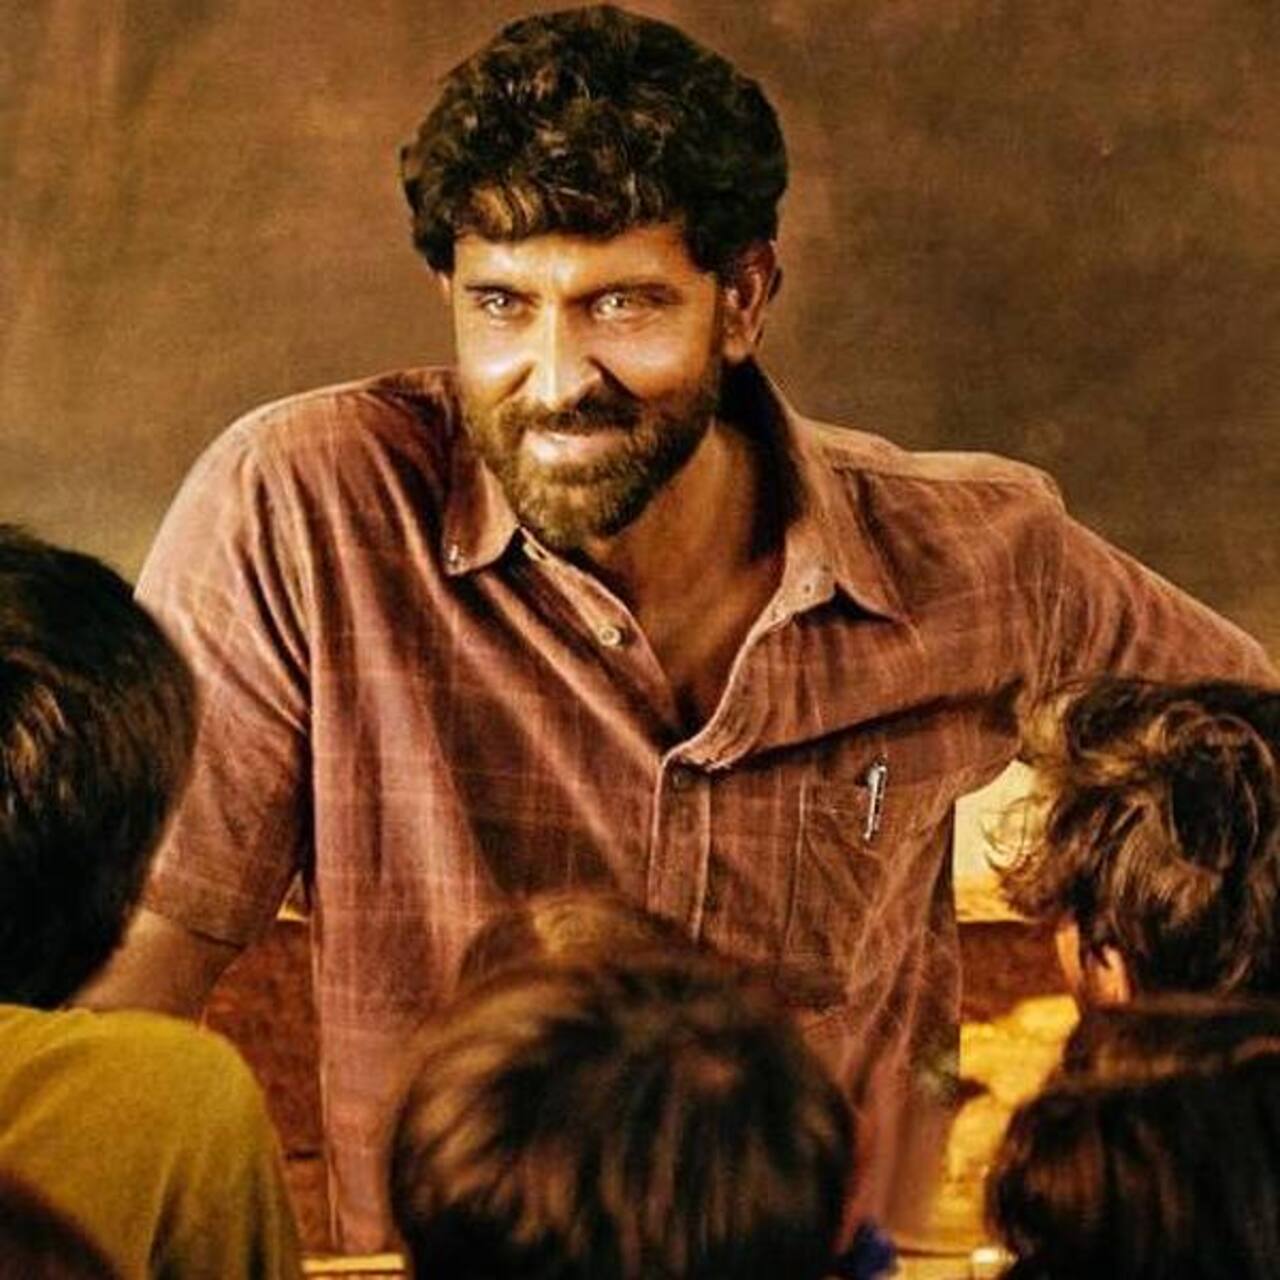 Super 30 BEATS Kaabil to become Hrithik Roshan's fourth highest grosser of  all-time | Bollywood Life